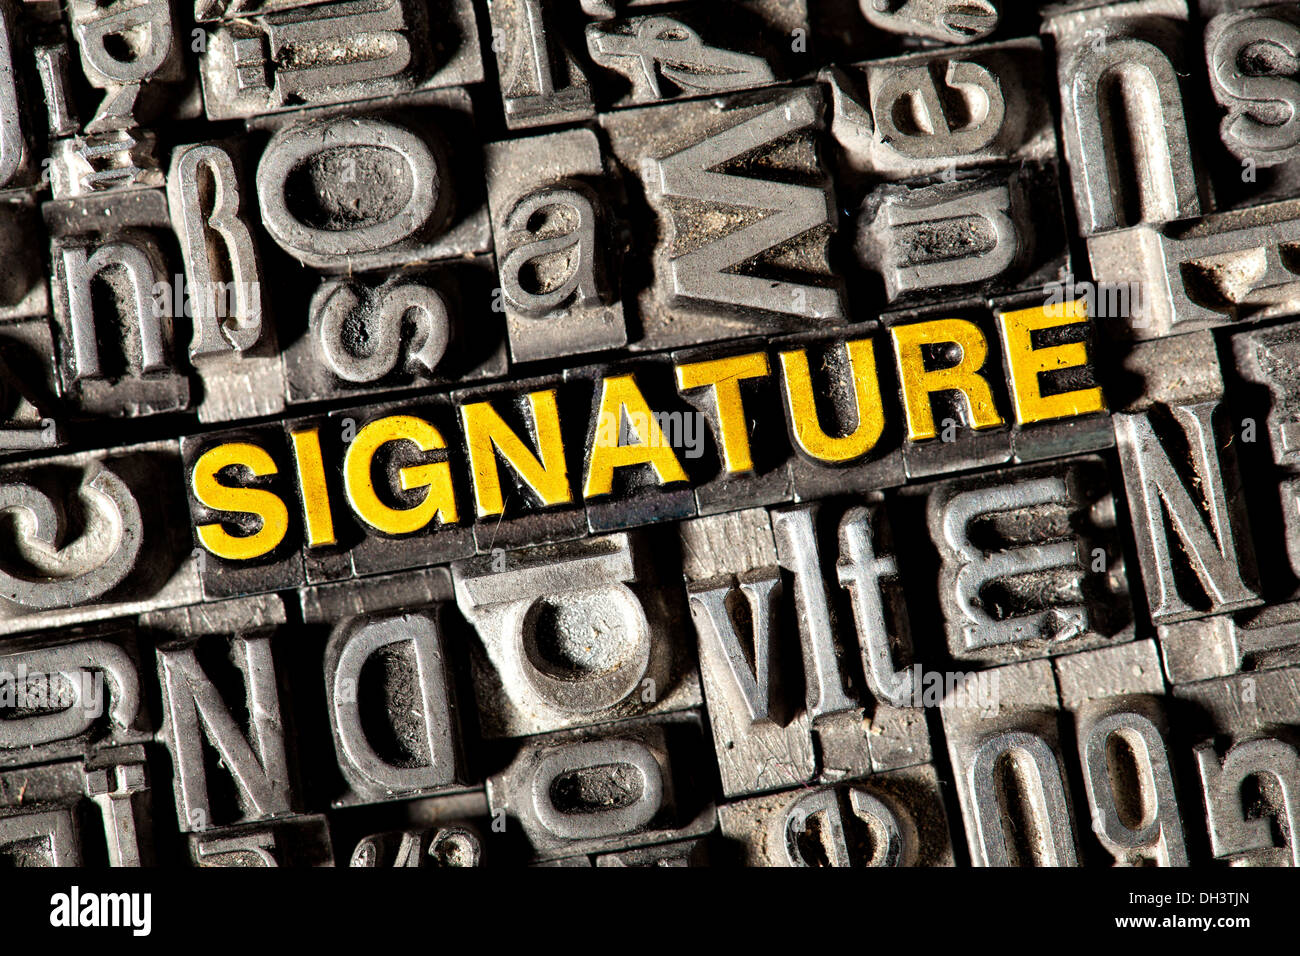 Old lead letters forming the word 'SIGNATURE' Stock Photo